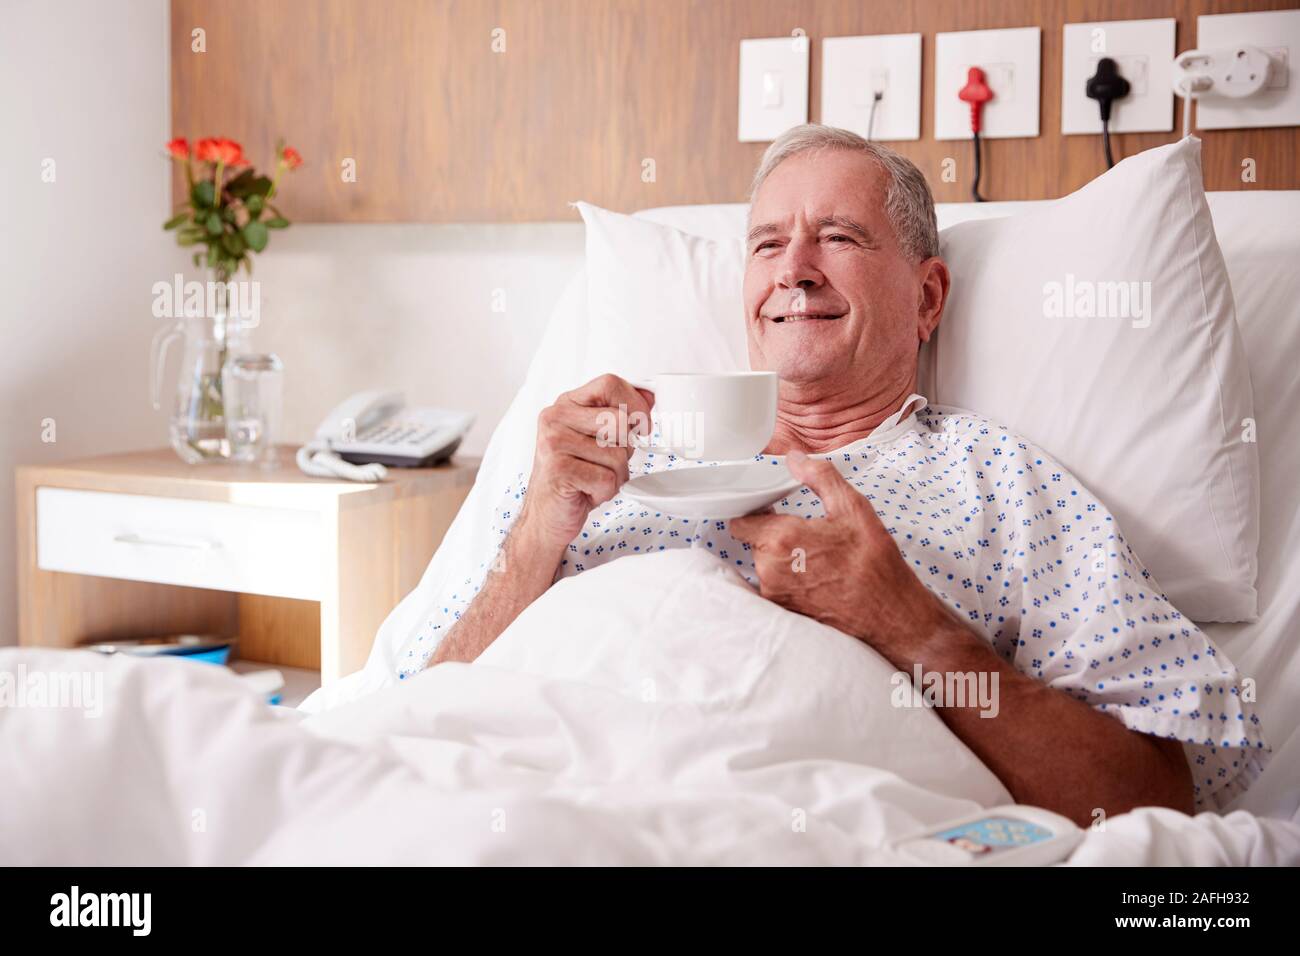 Male Senior Patient Lying In Hospital Bed Enjoying Hot Drink Stock Photo